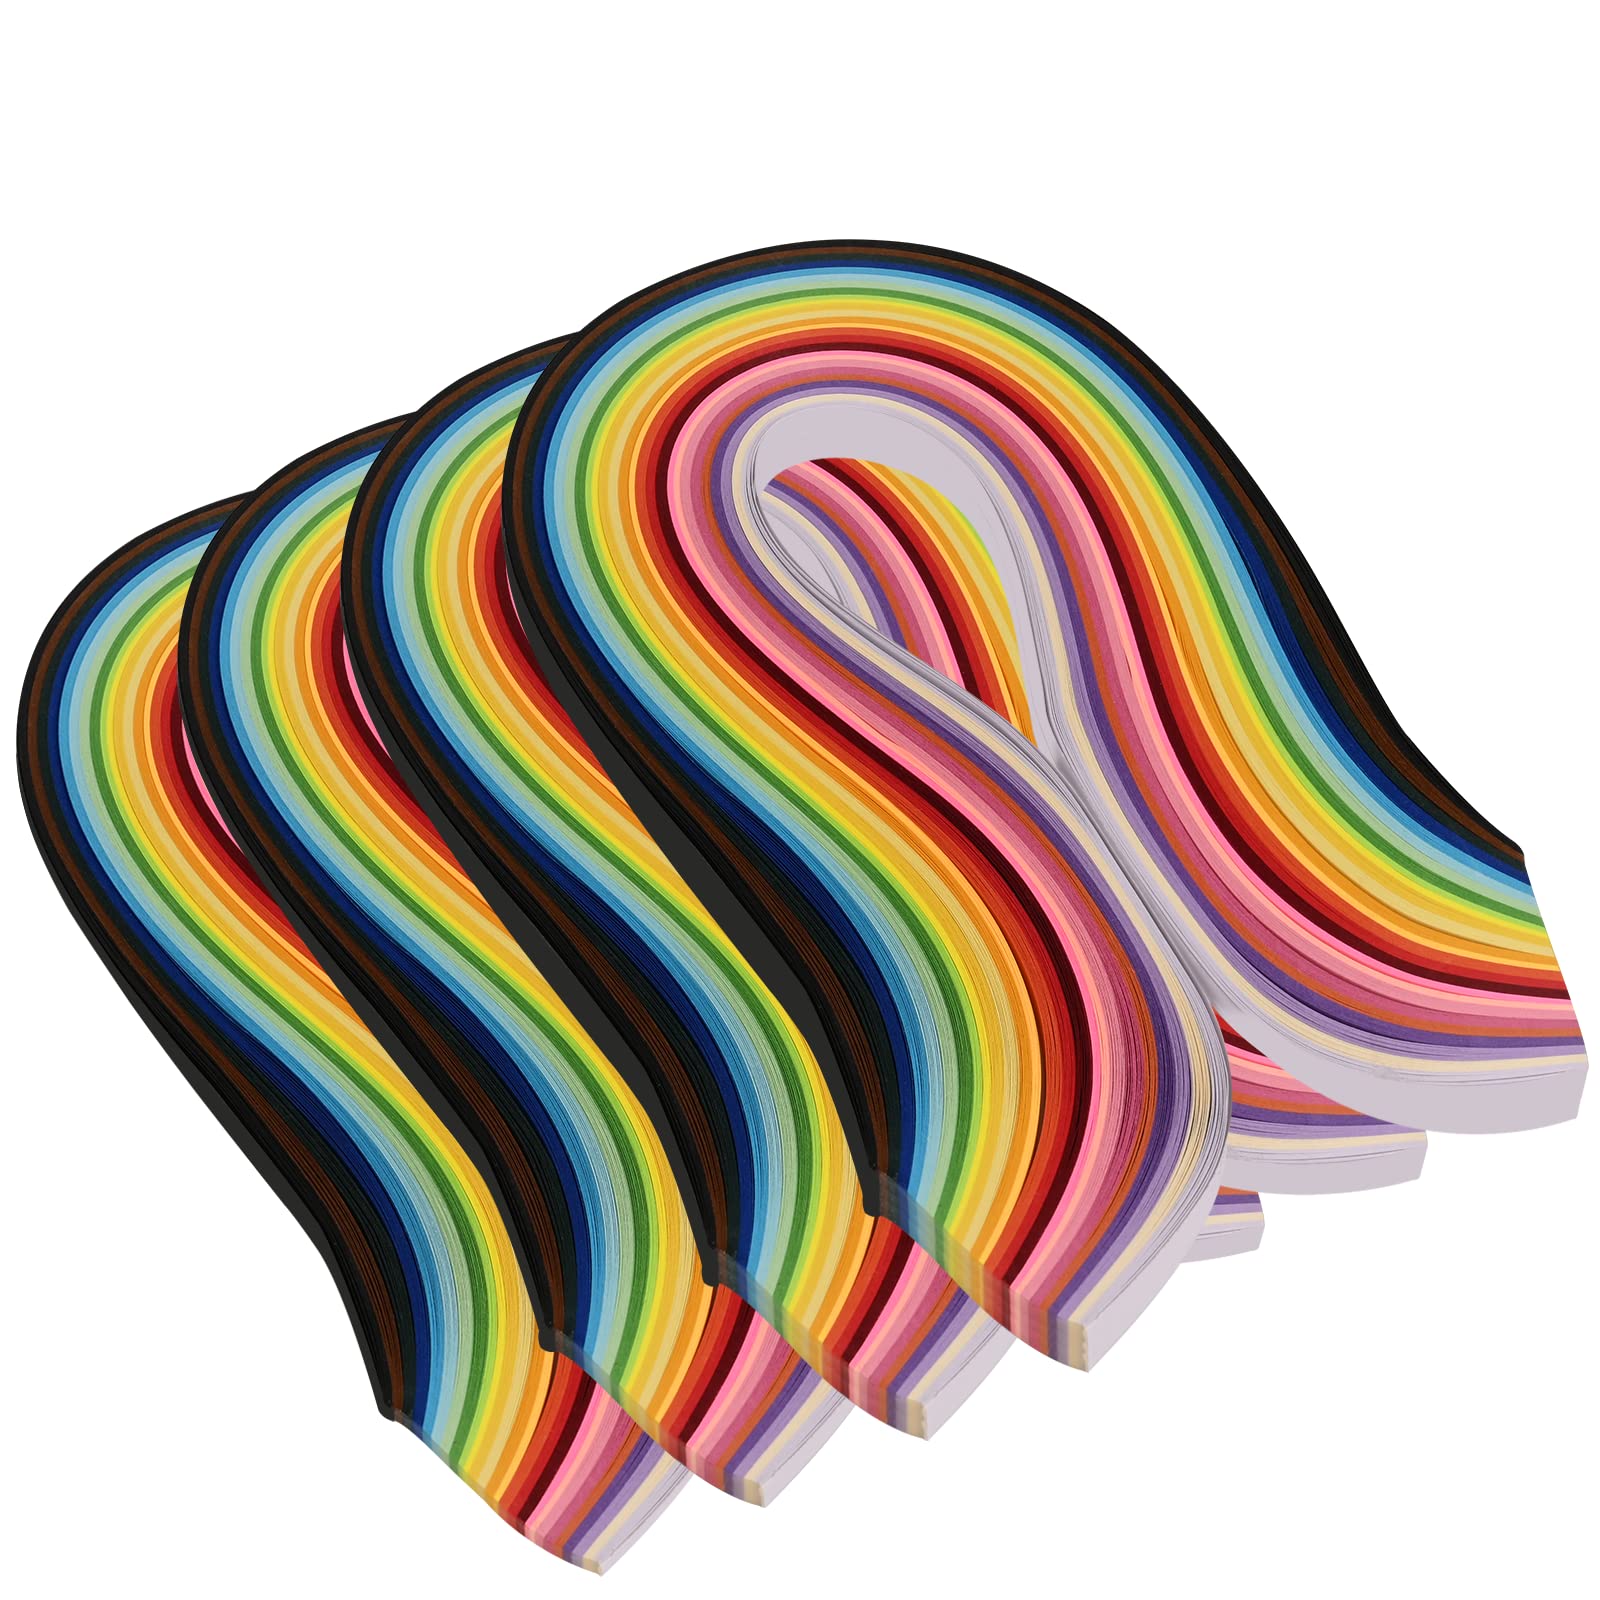 YURROAD 36 Colors Quilling Paper Strips Kit 720 Strips Length 54cm Width  3mm 5mm 7mm 10mm(4 Packs)